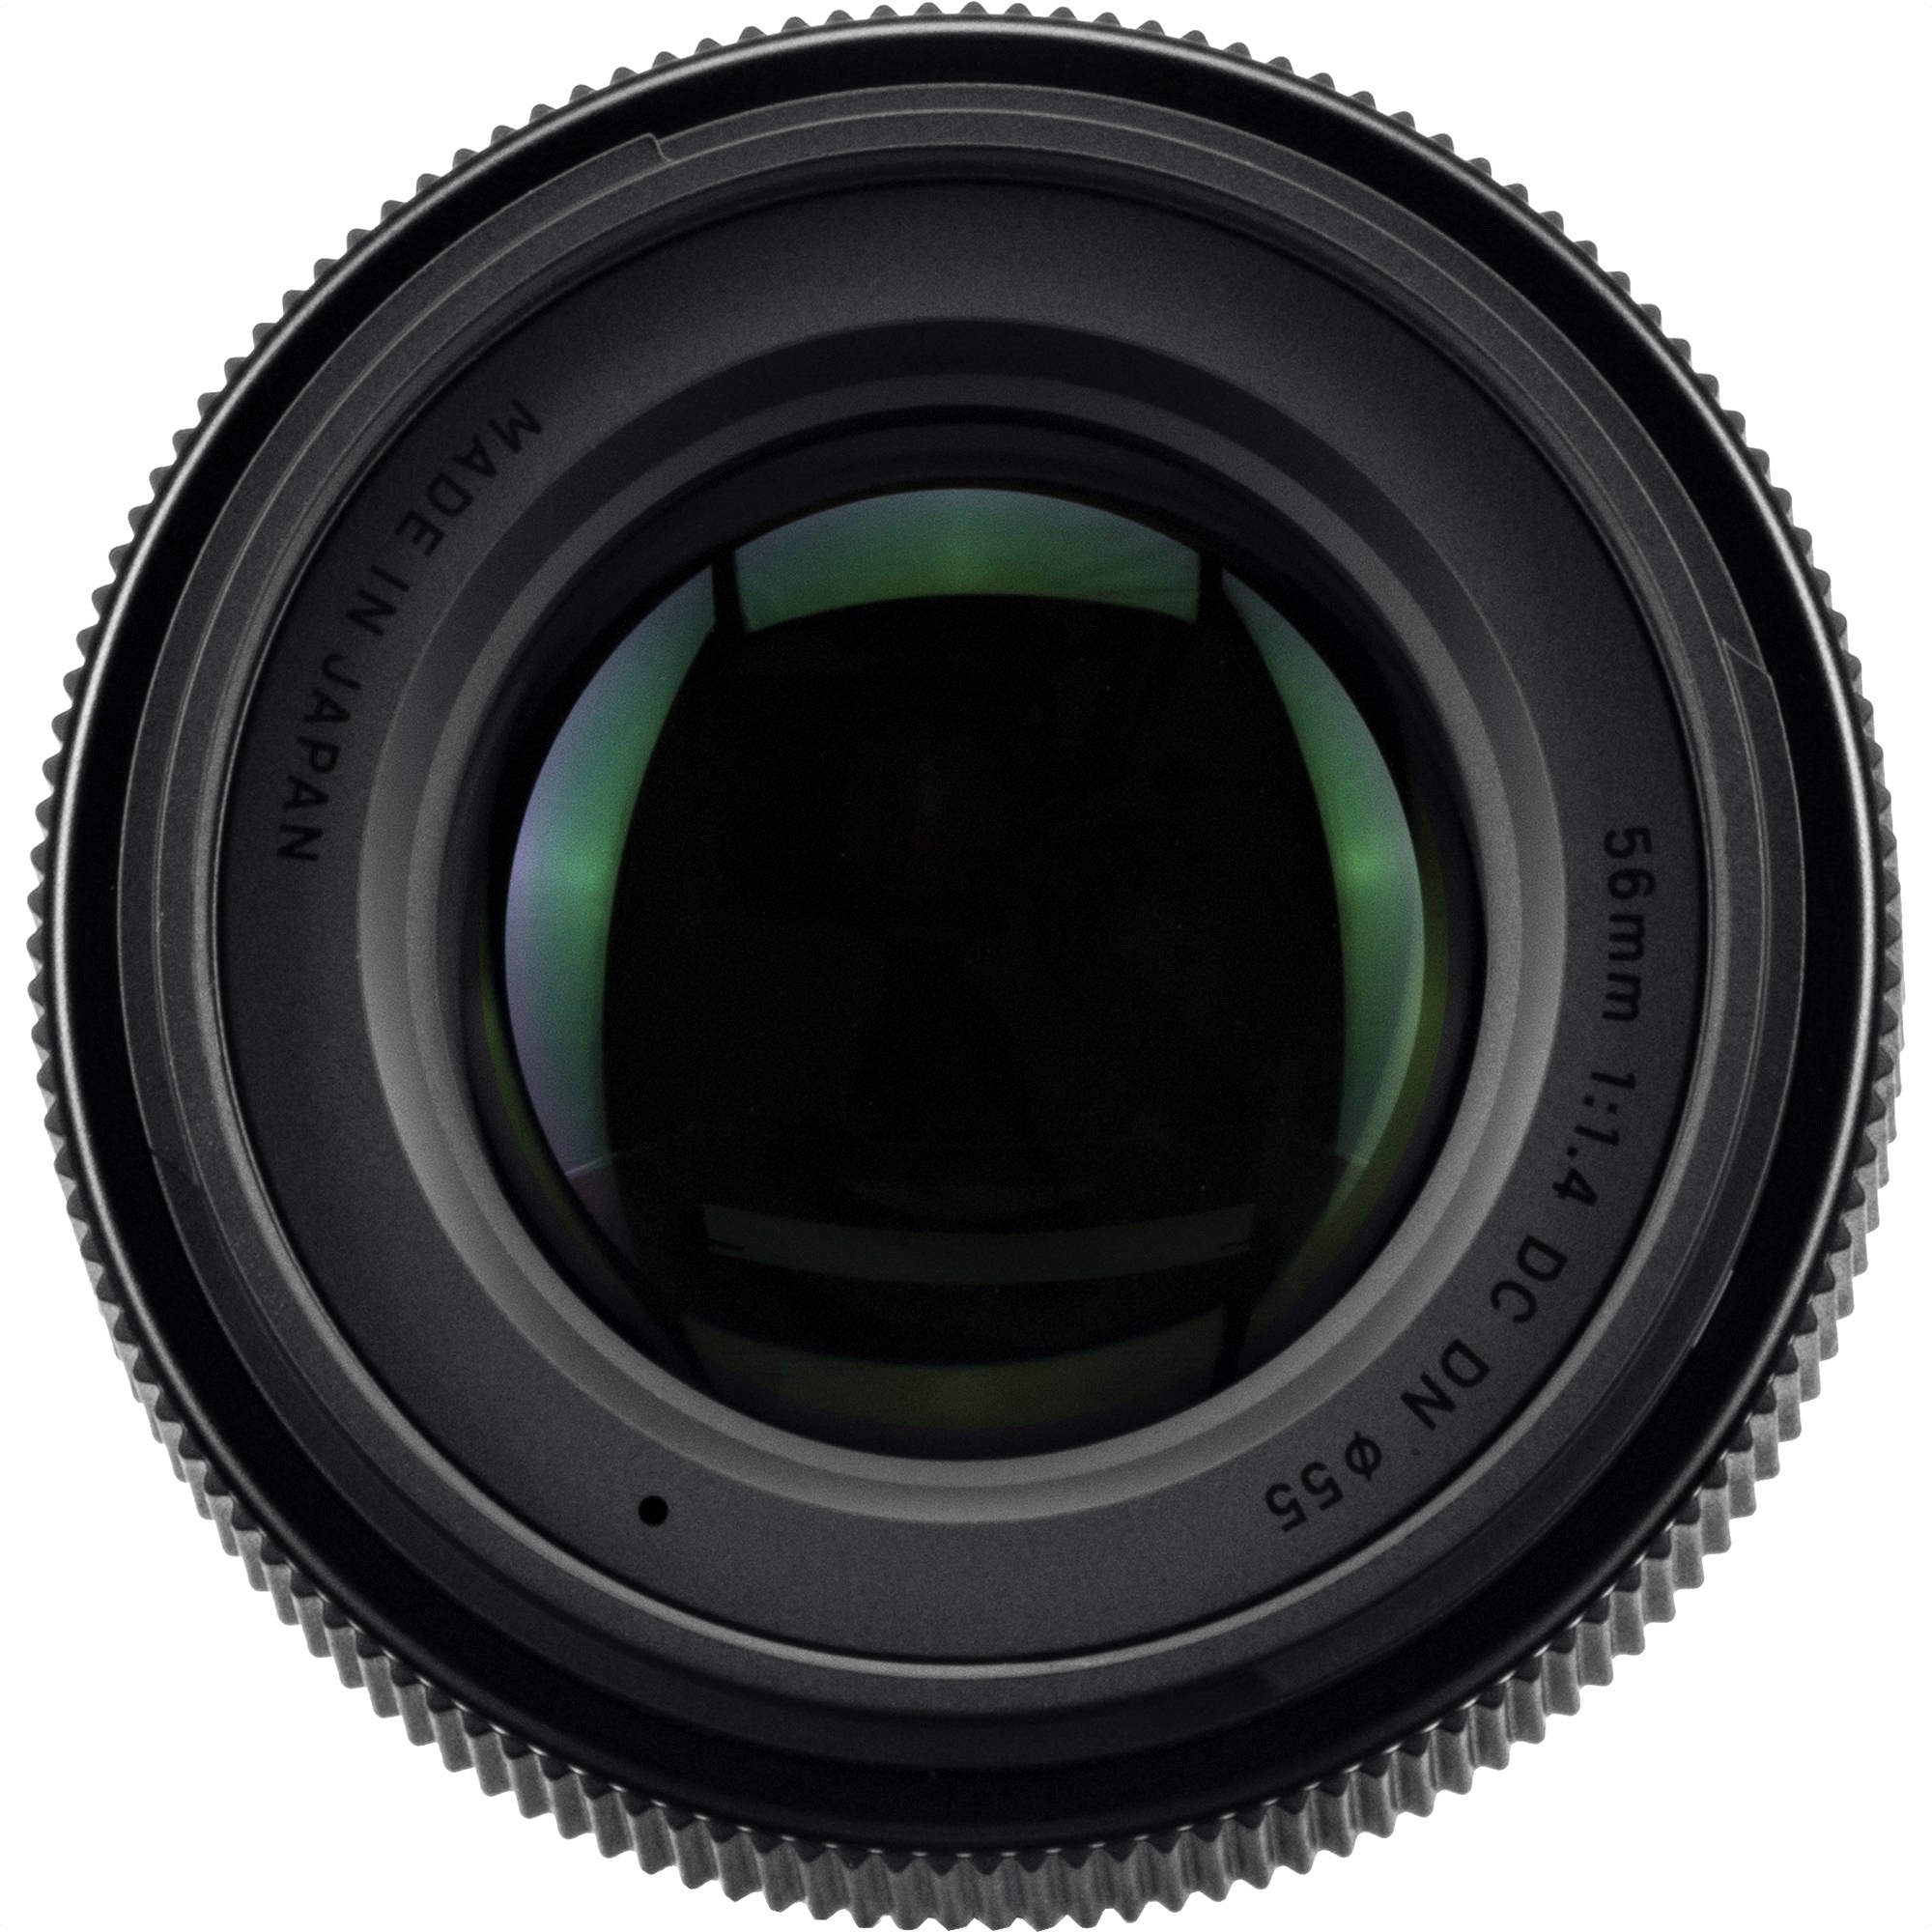 Sigma 56mm f/1.4 DC DN Contemporary Lens for Leica L - Front View